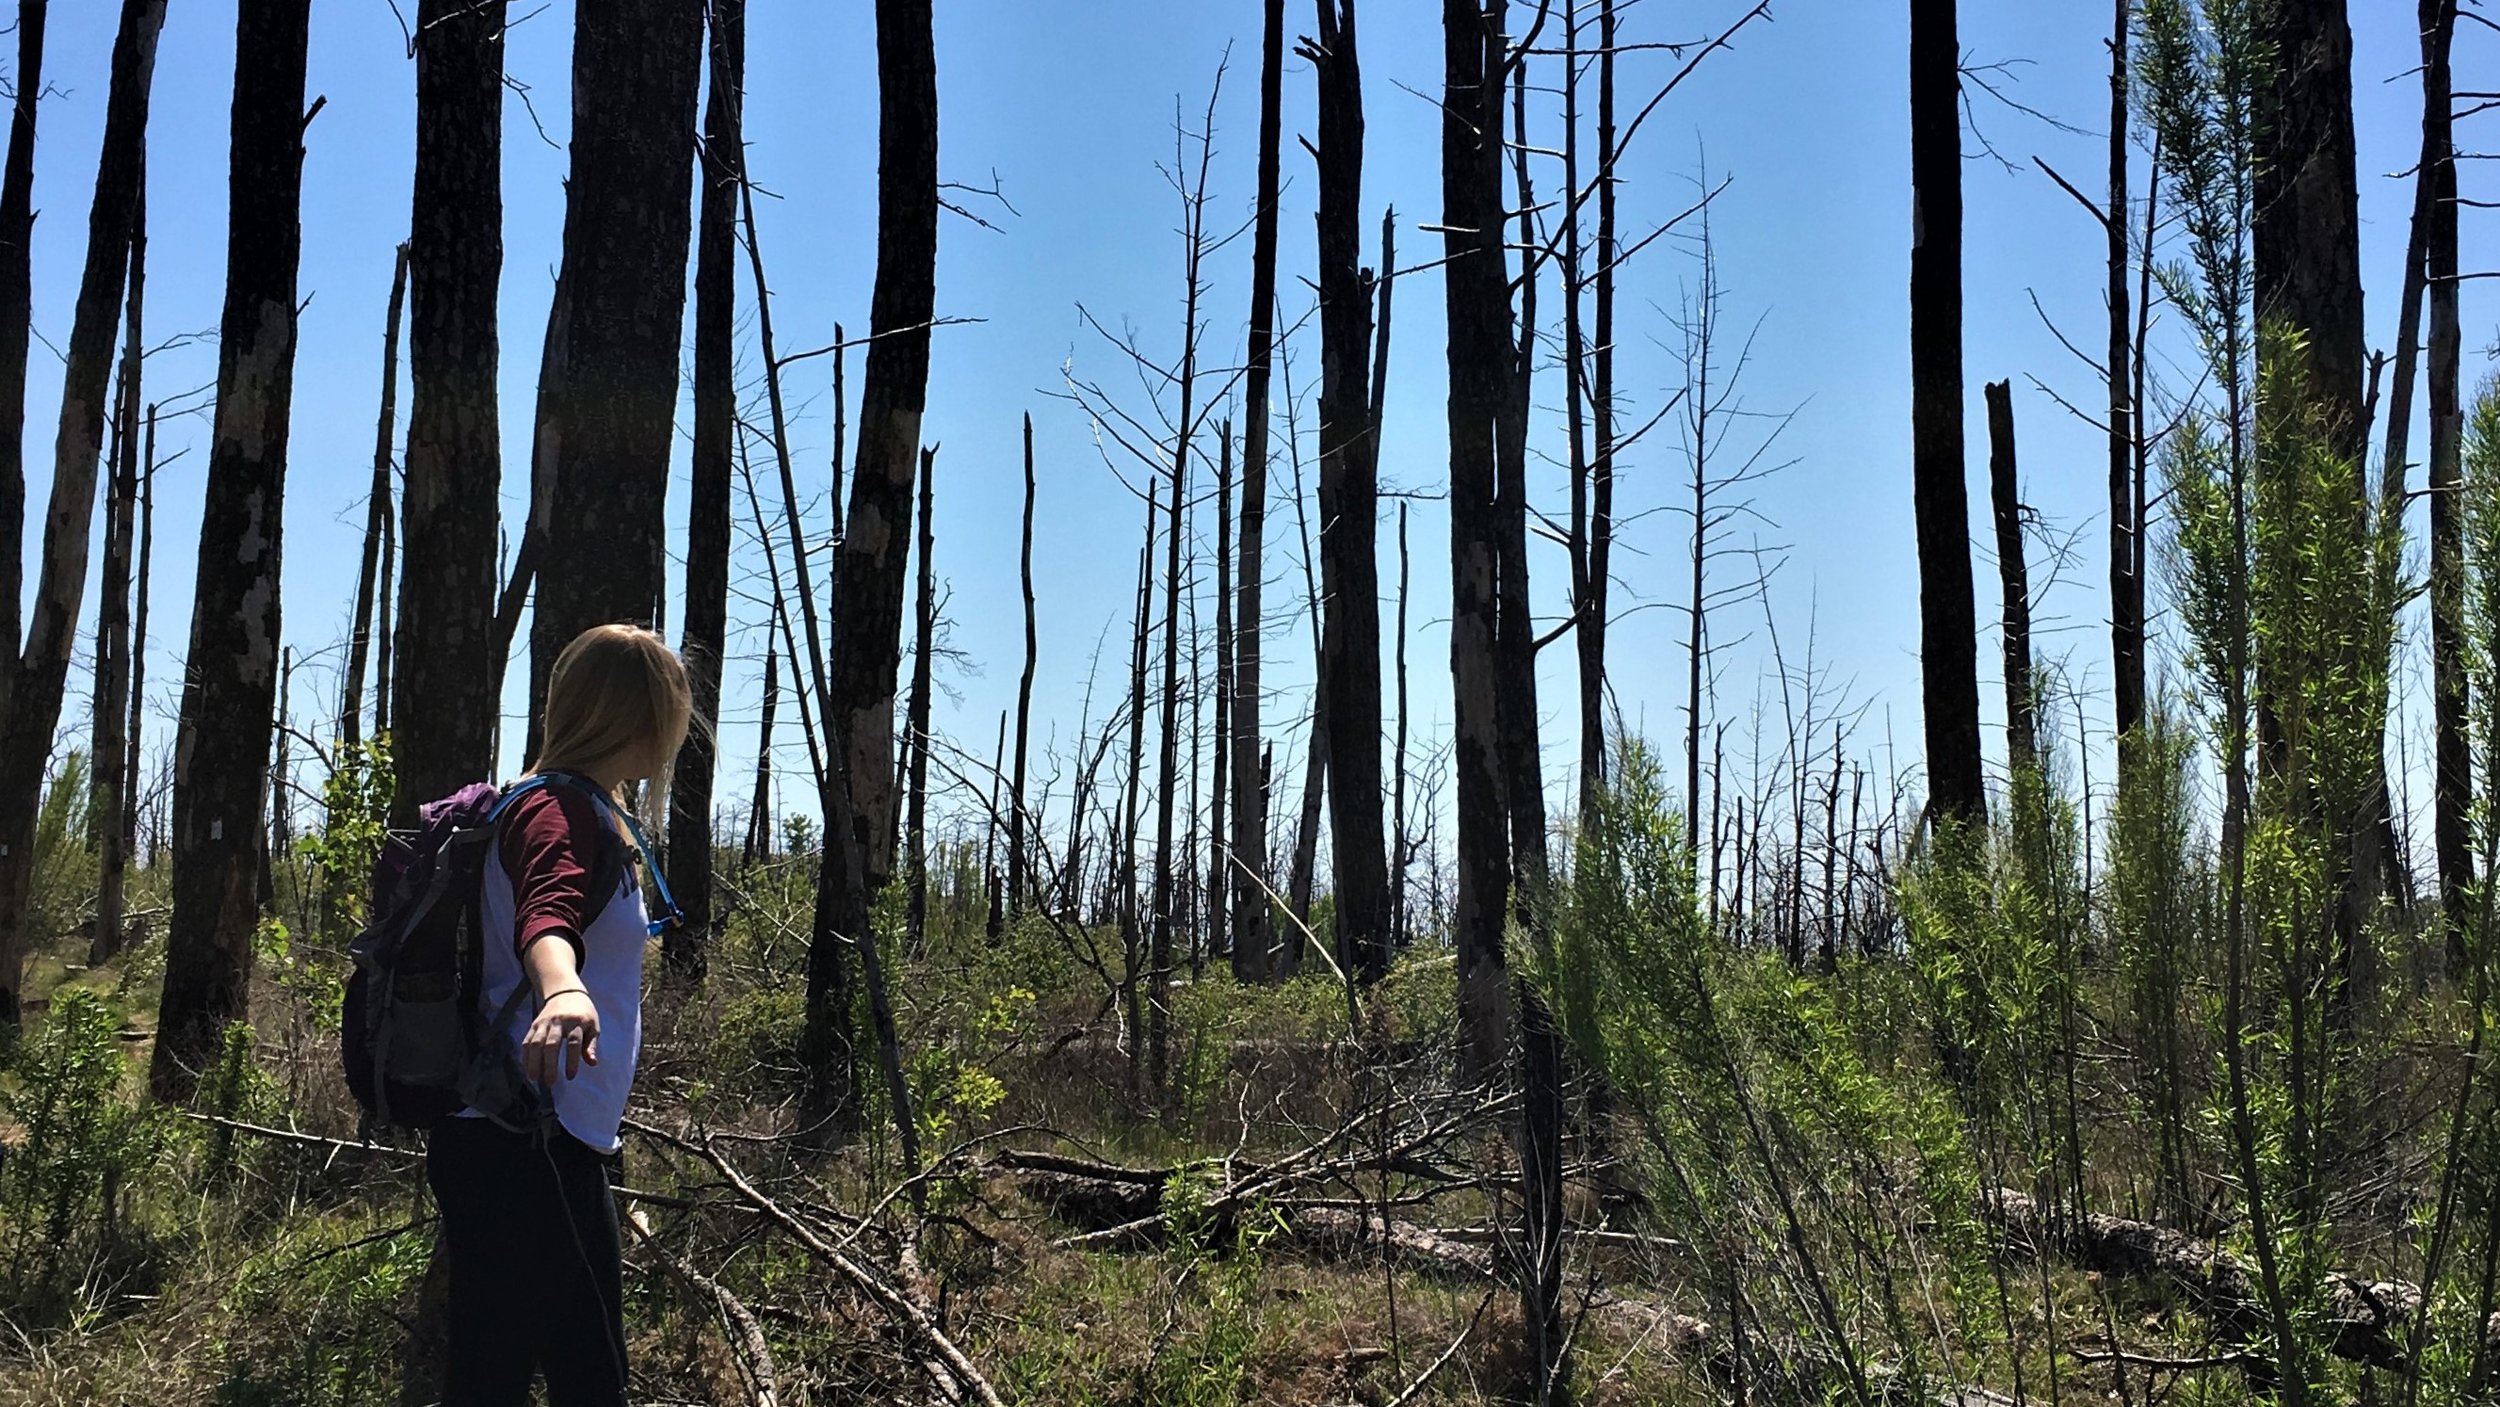 Pictured: Hiking amidst the pines affected by the 2011 Bastrop Wildfire      March 2016 | Bastrop State Park, Bastrop, TX